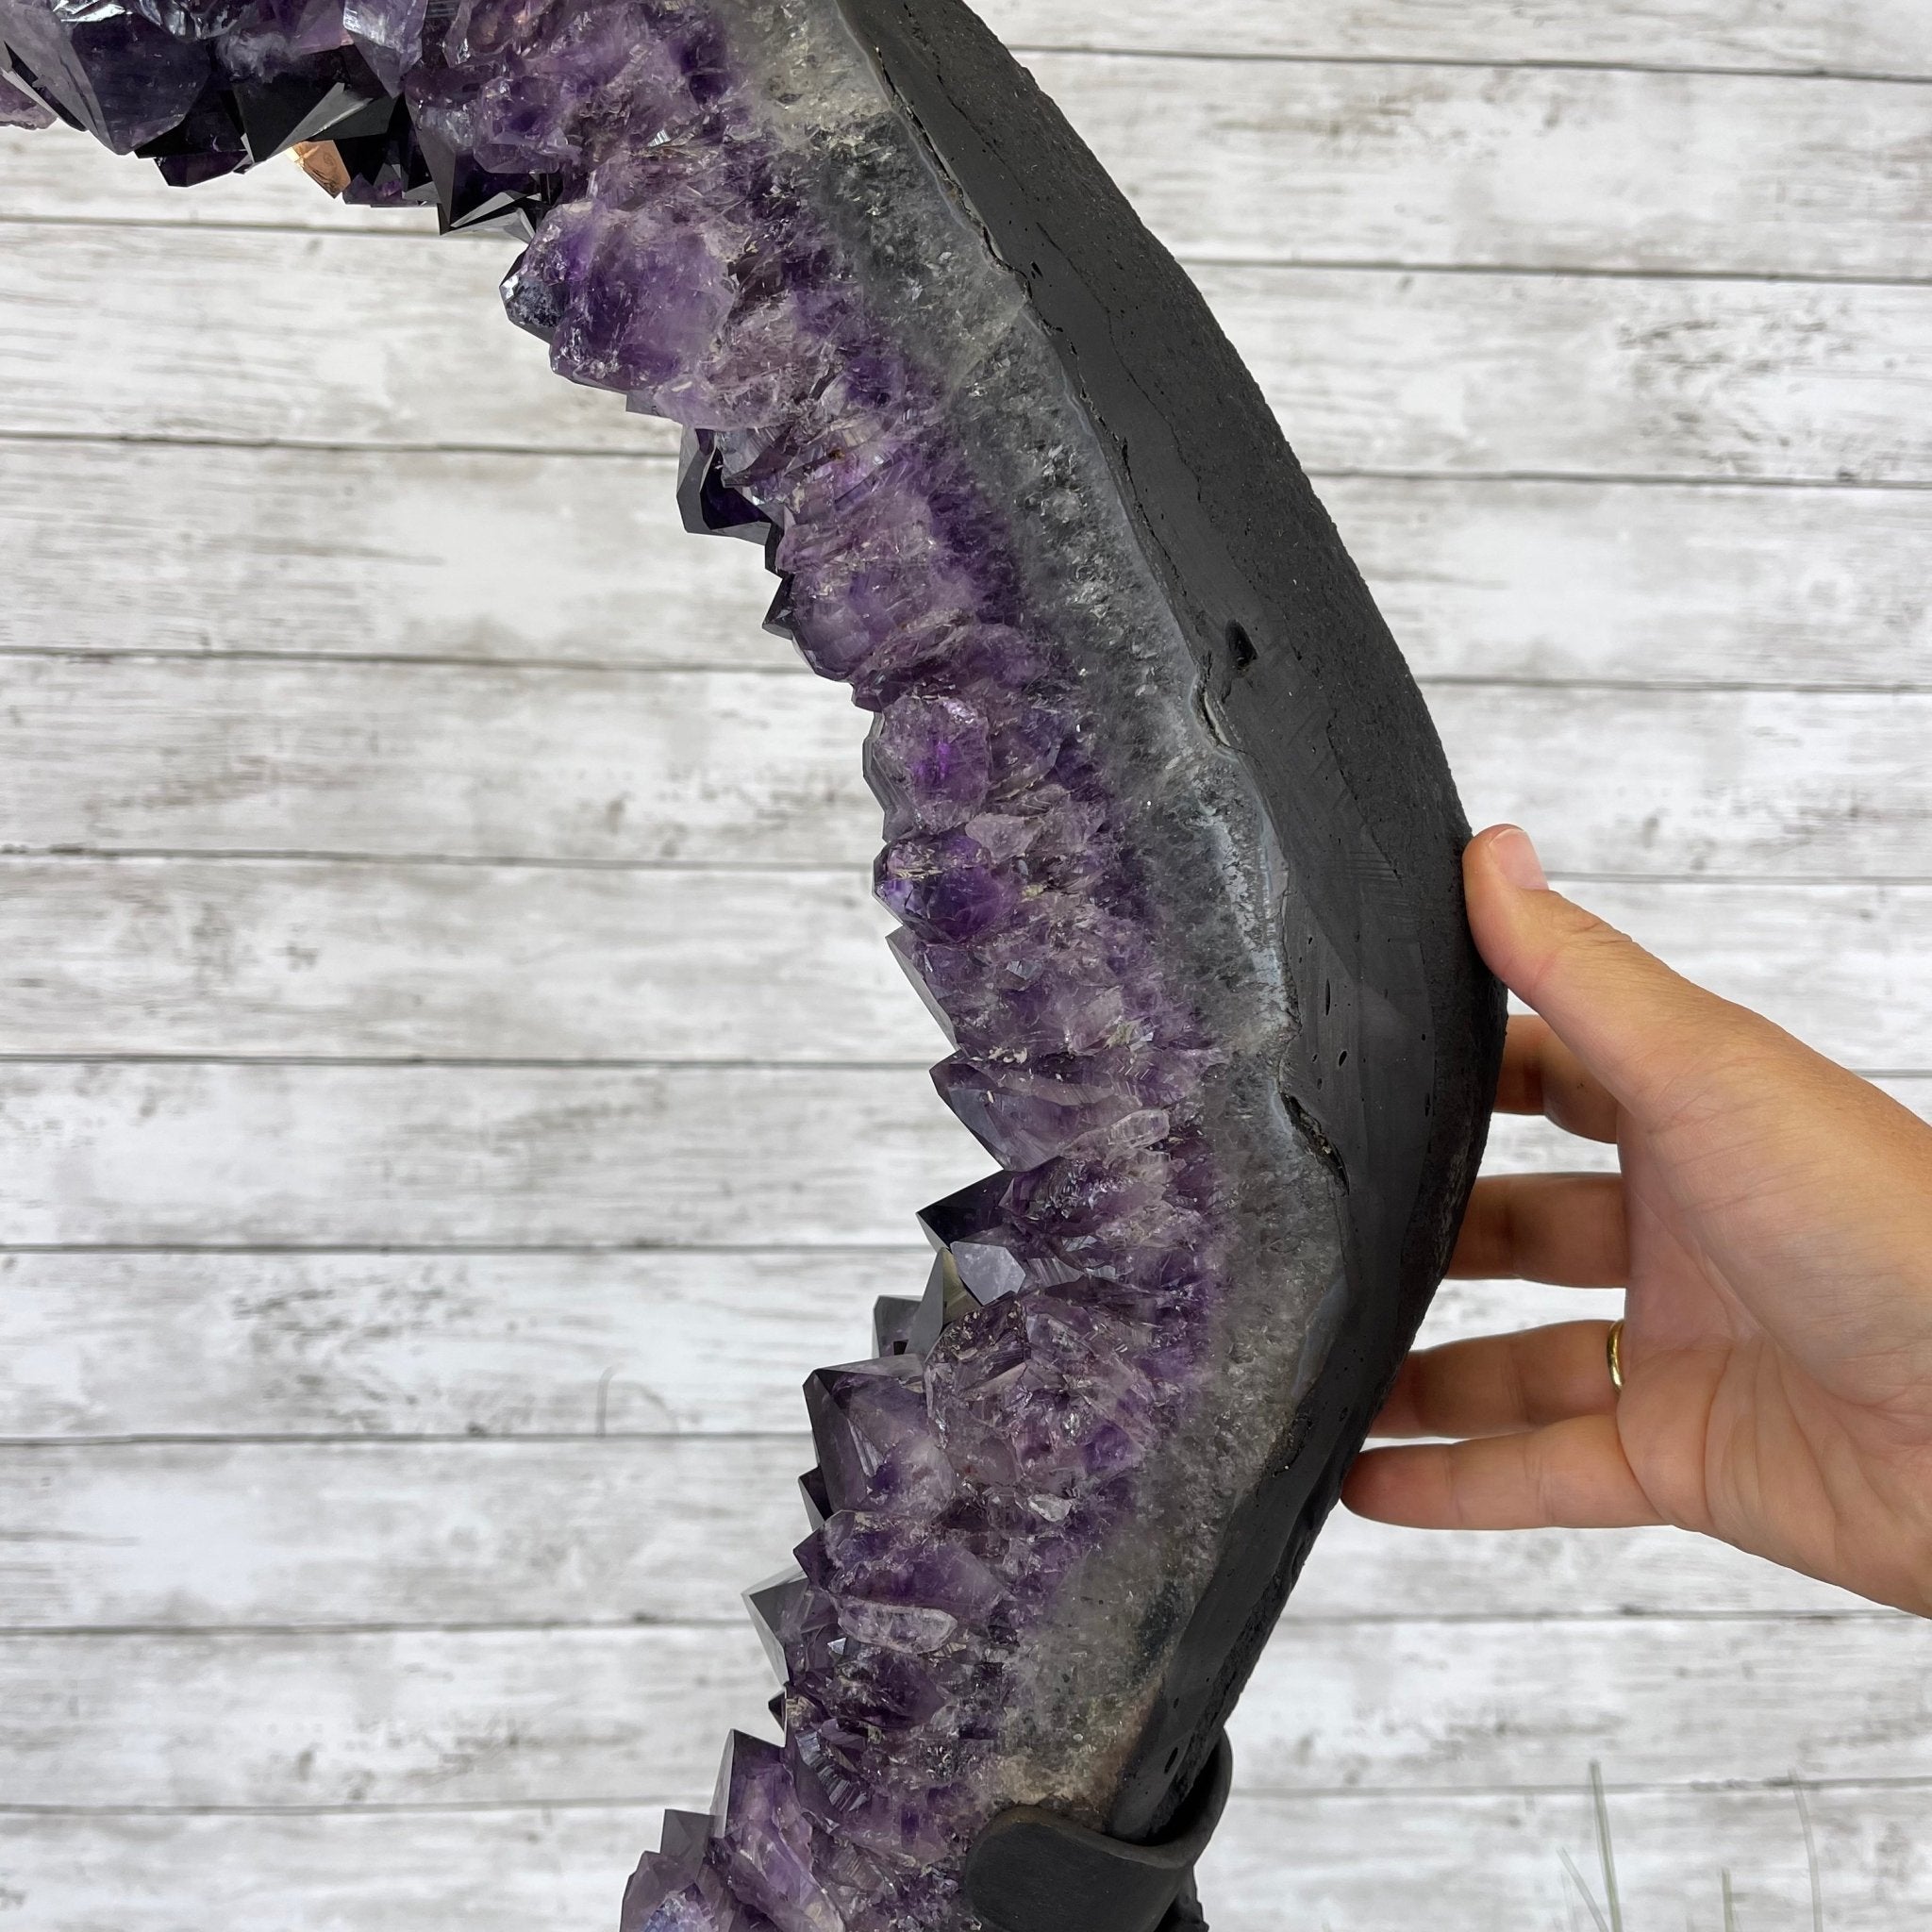 Super Quality Brazilian Amethyst Crystal Portal on a Tall Rotating Stand, 97 lbs & 71" tall Model #5604-0097 by Brazil Gems - Brazil GemsBrazil GemsSuper Quality Brazilian Amethyst Crystal Portal on a Tall Rotating Stand, 97 lbs & 71" tall Model #5604-0097 by Brazil GemsPortals on Rotating Bases5604-0097